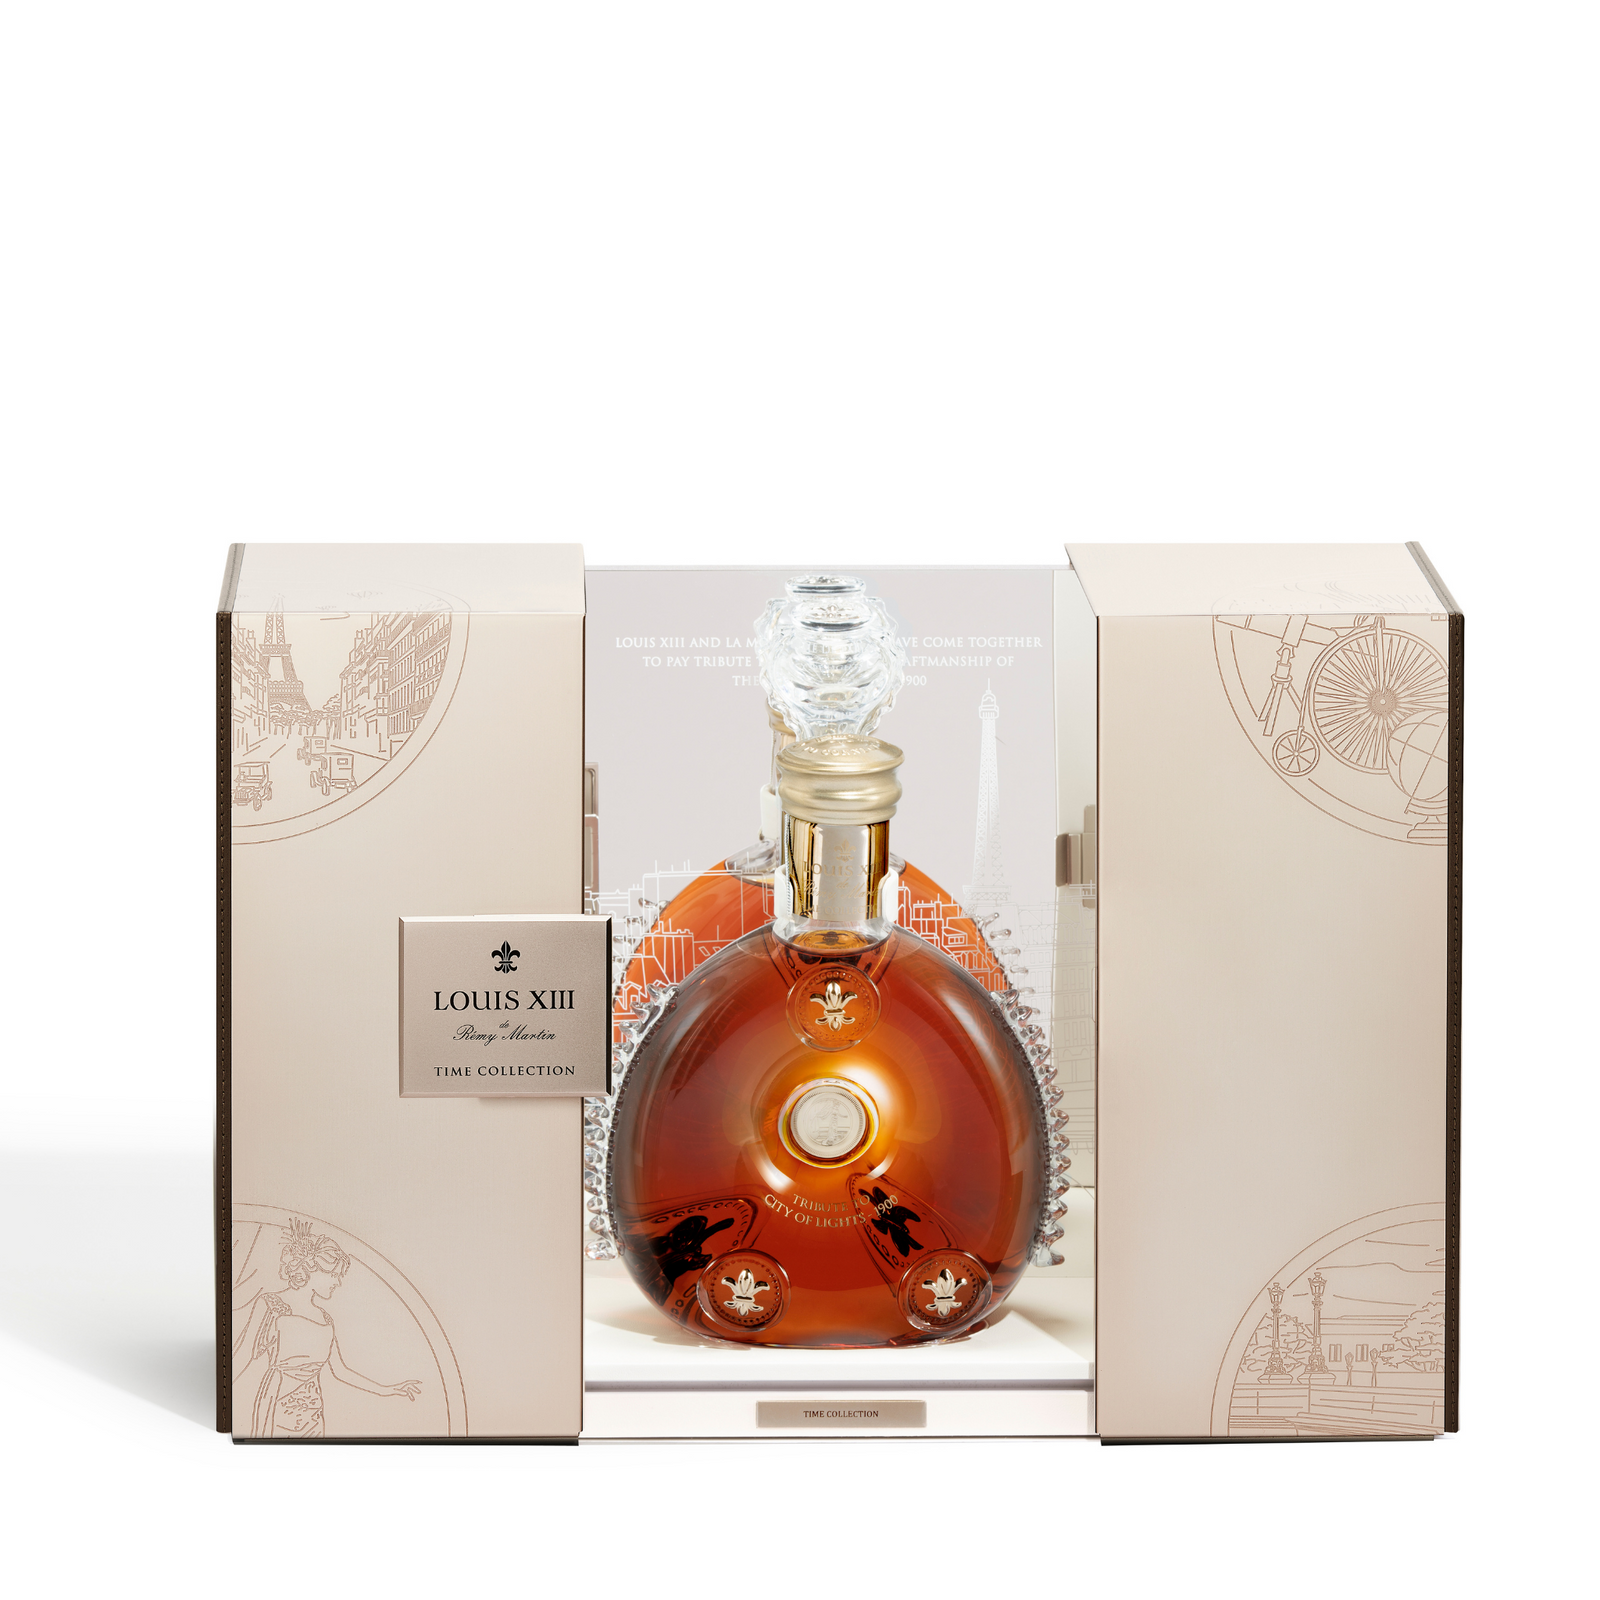 REMY MARTIN Louis XIII Cognac BACCARAT Crystal Decanter Empty Bottle 750 ML